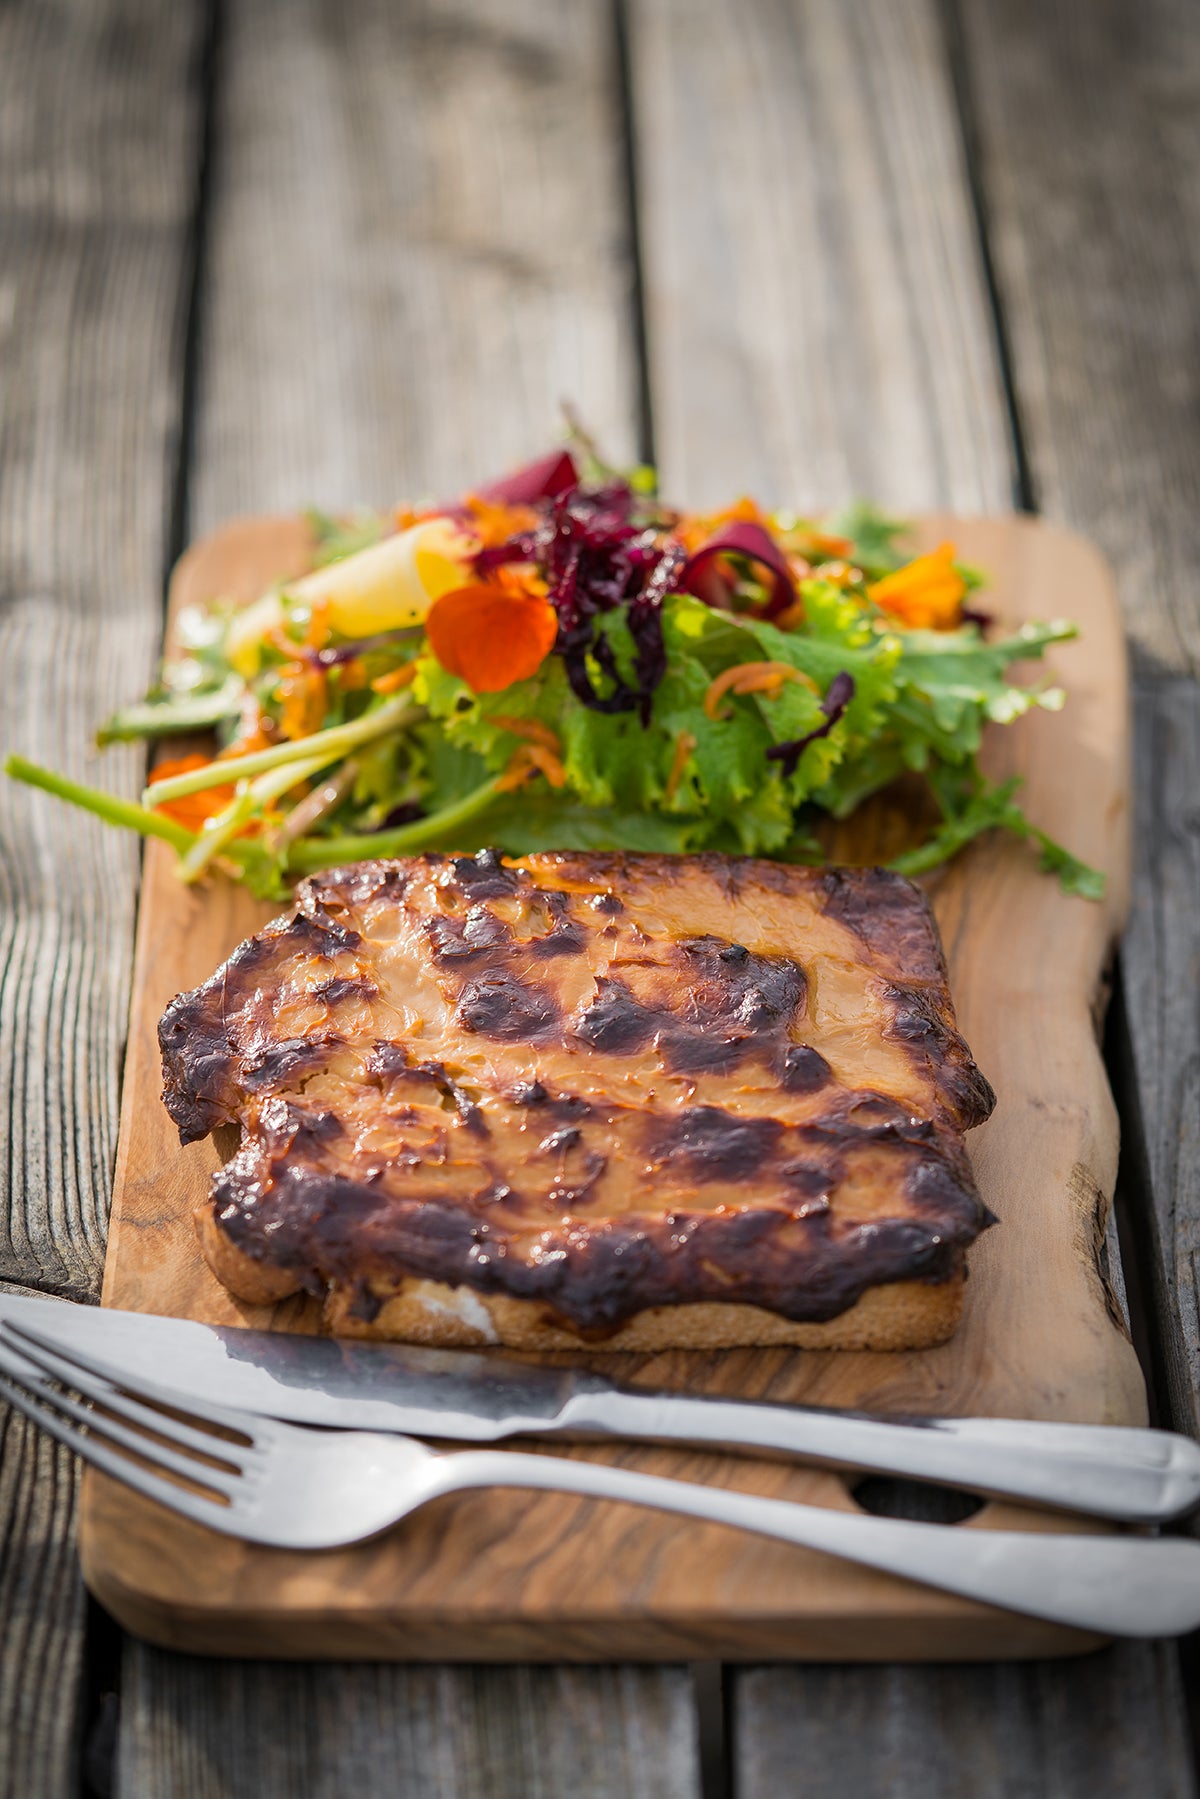 What is Welsh rarebit? (Hint: it’s not just cheese on toast)